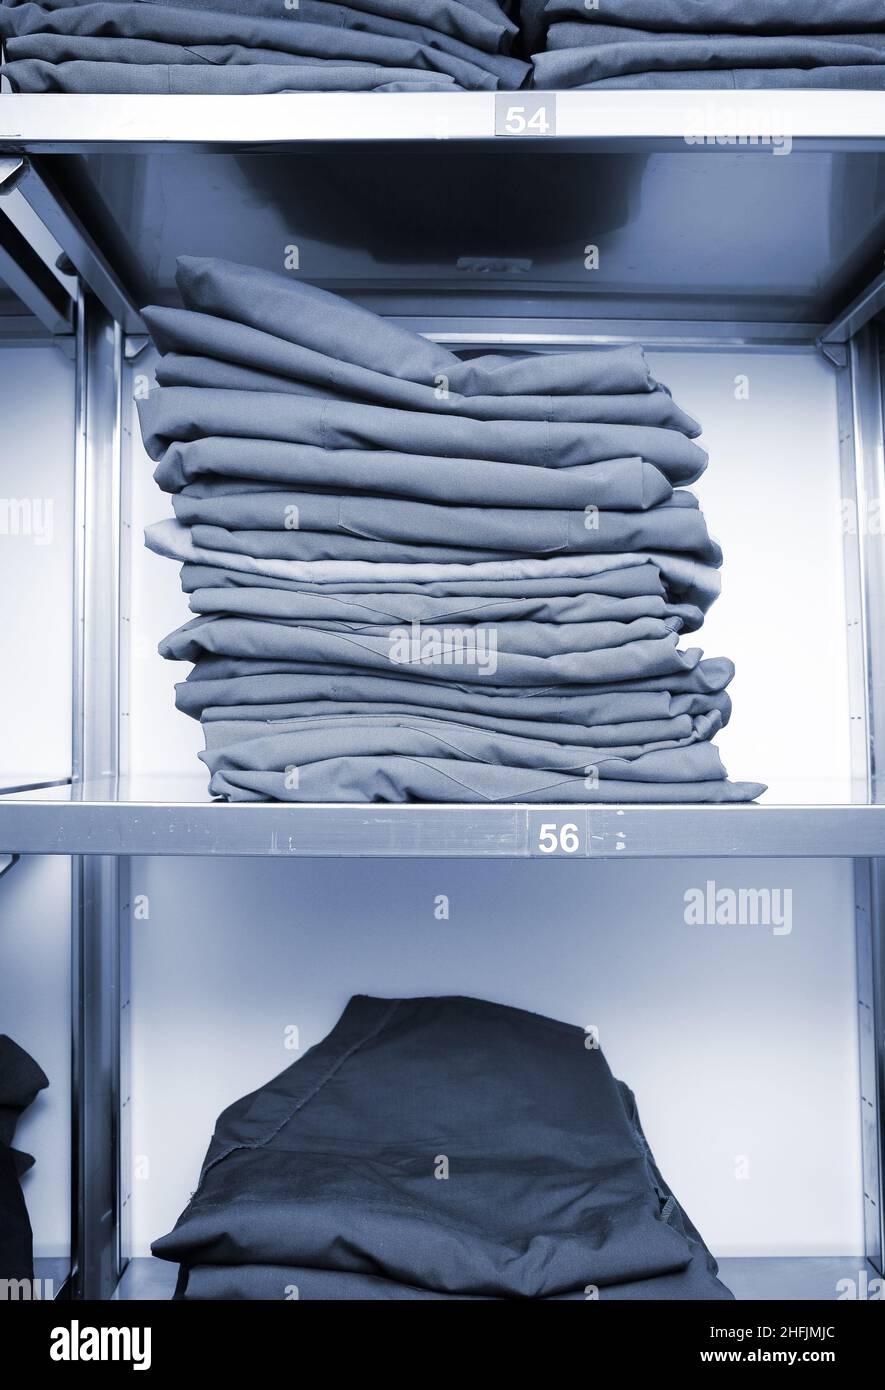 Warehouse shelves with uniform clothes stacked in a pile with size markings. Stock Photo